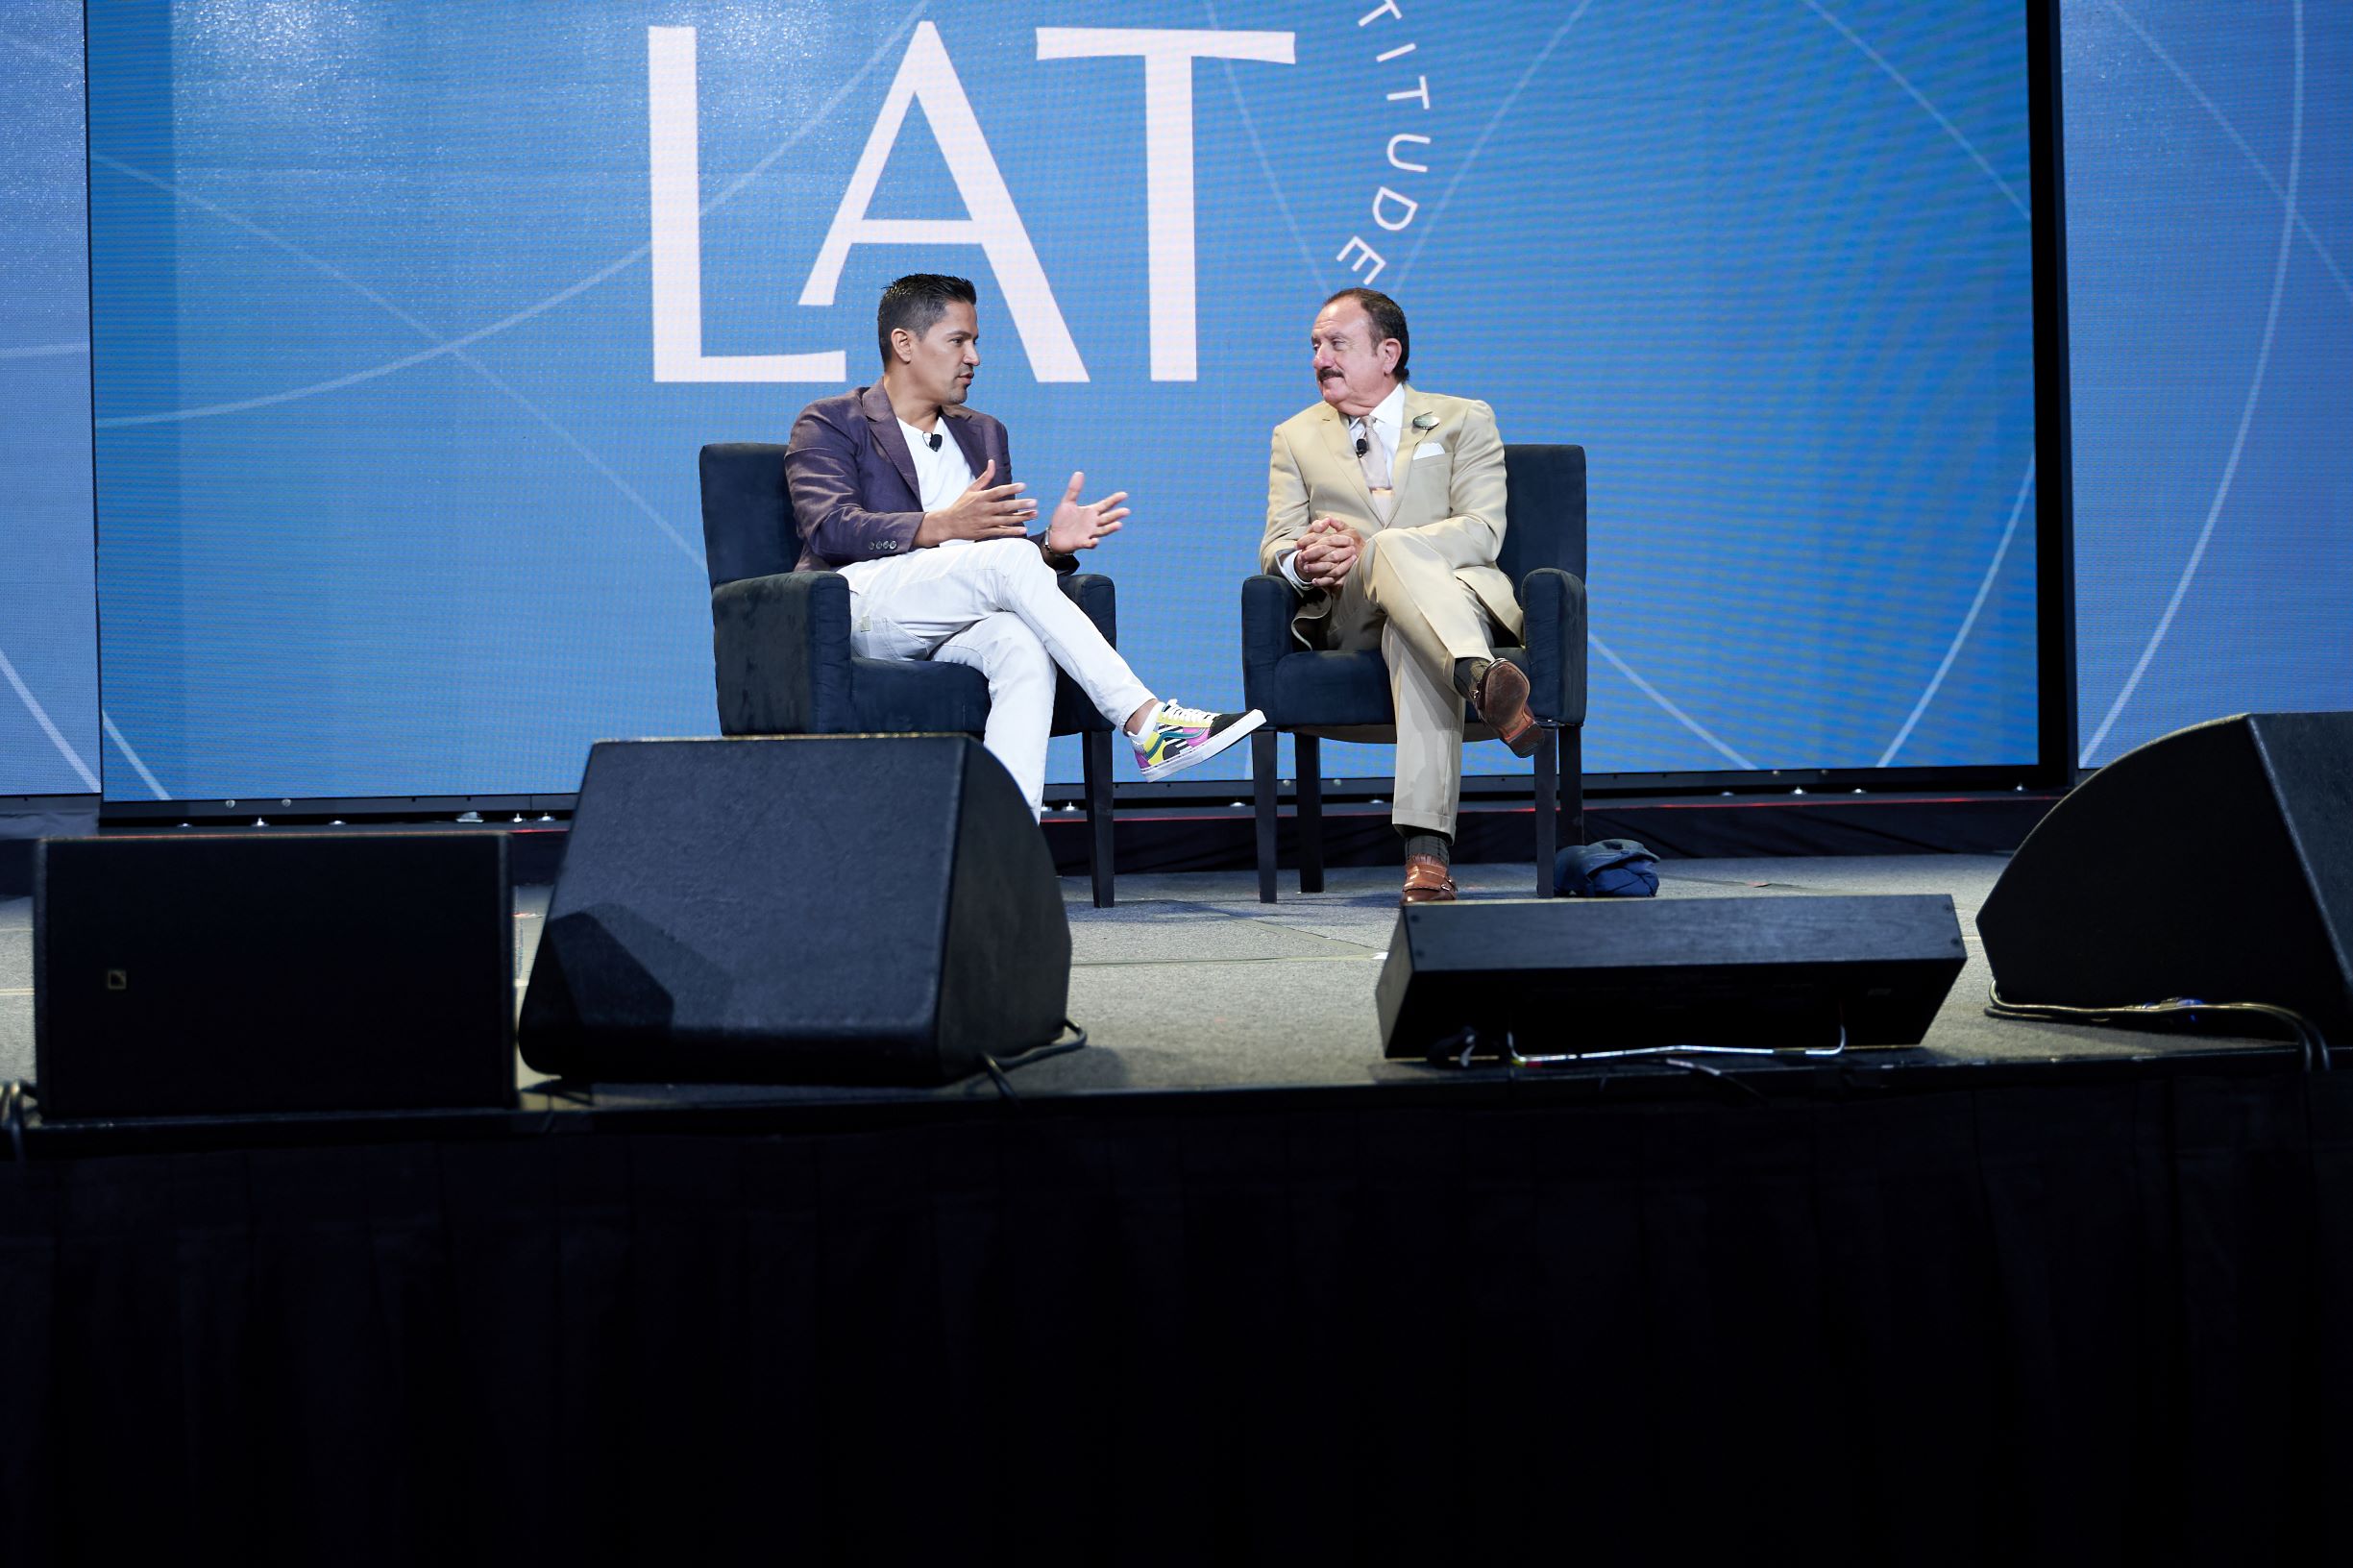 L’ATTITUDE conference explores ways Latinos are driving the “New